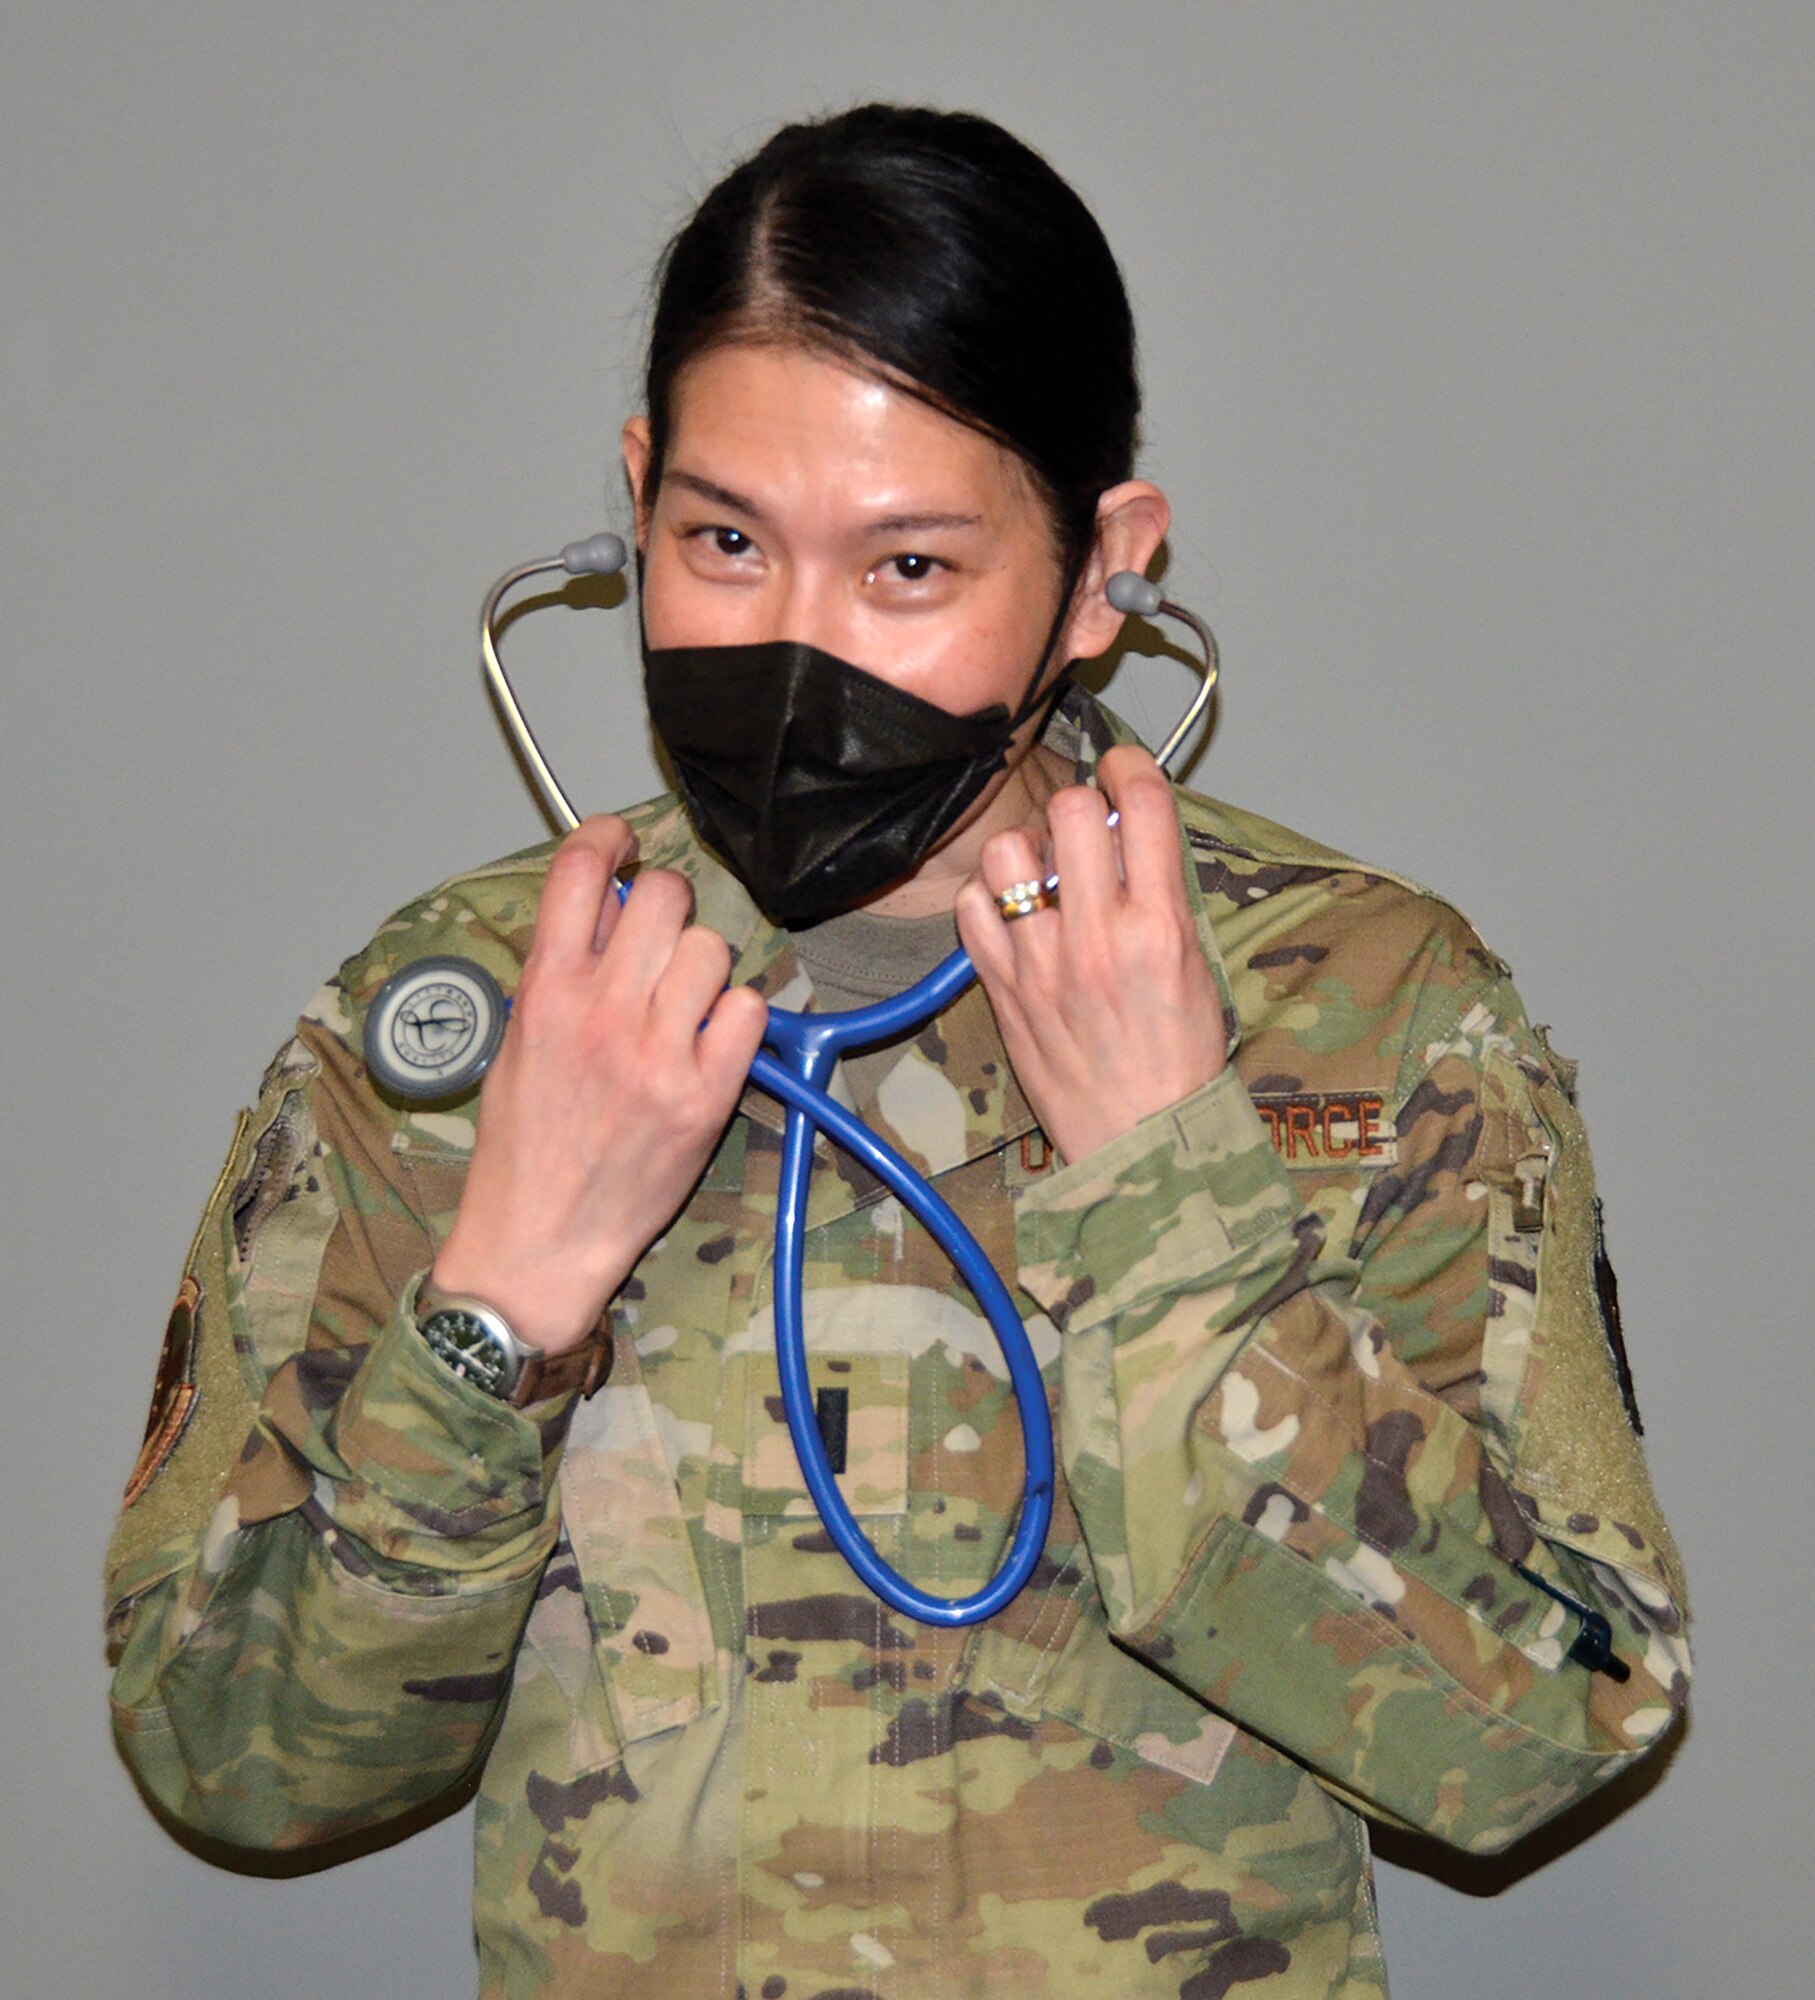 First Lt. Herodia “Dina” Lu discusses her new role as a physician’s assistant at the 445th Airlift Wing. Lu commissioned in December 2020 and is the newest officer in the 445th Aerospace Medicine Squadron.